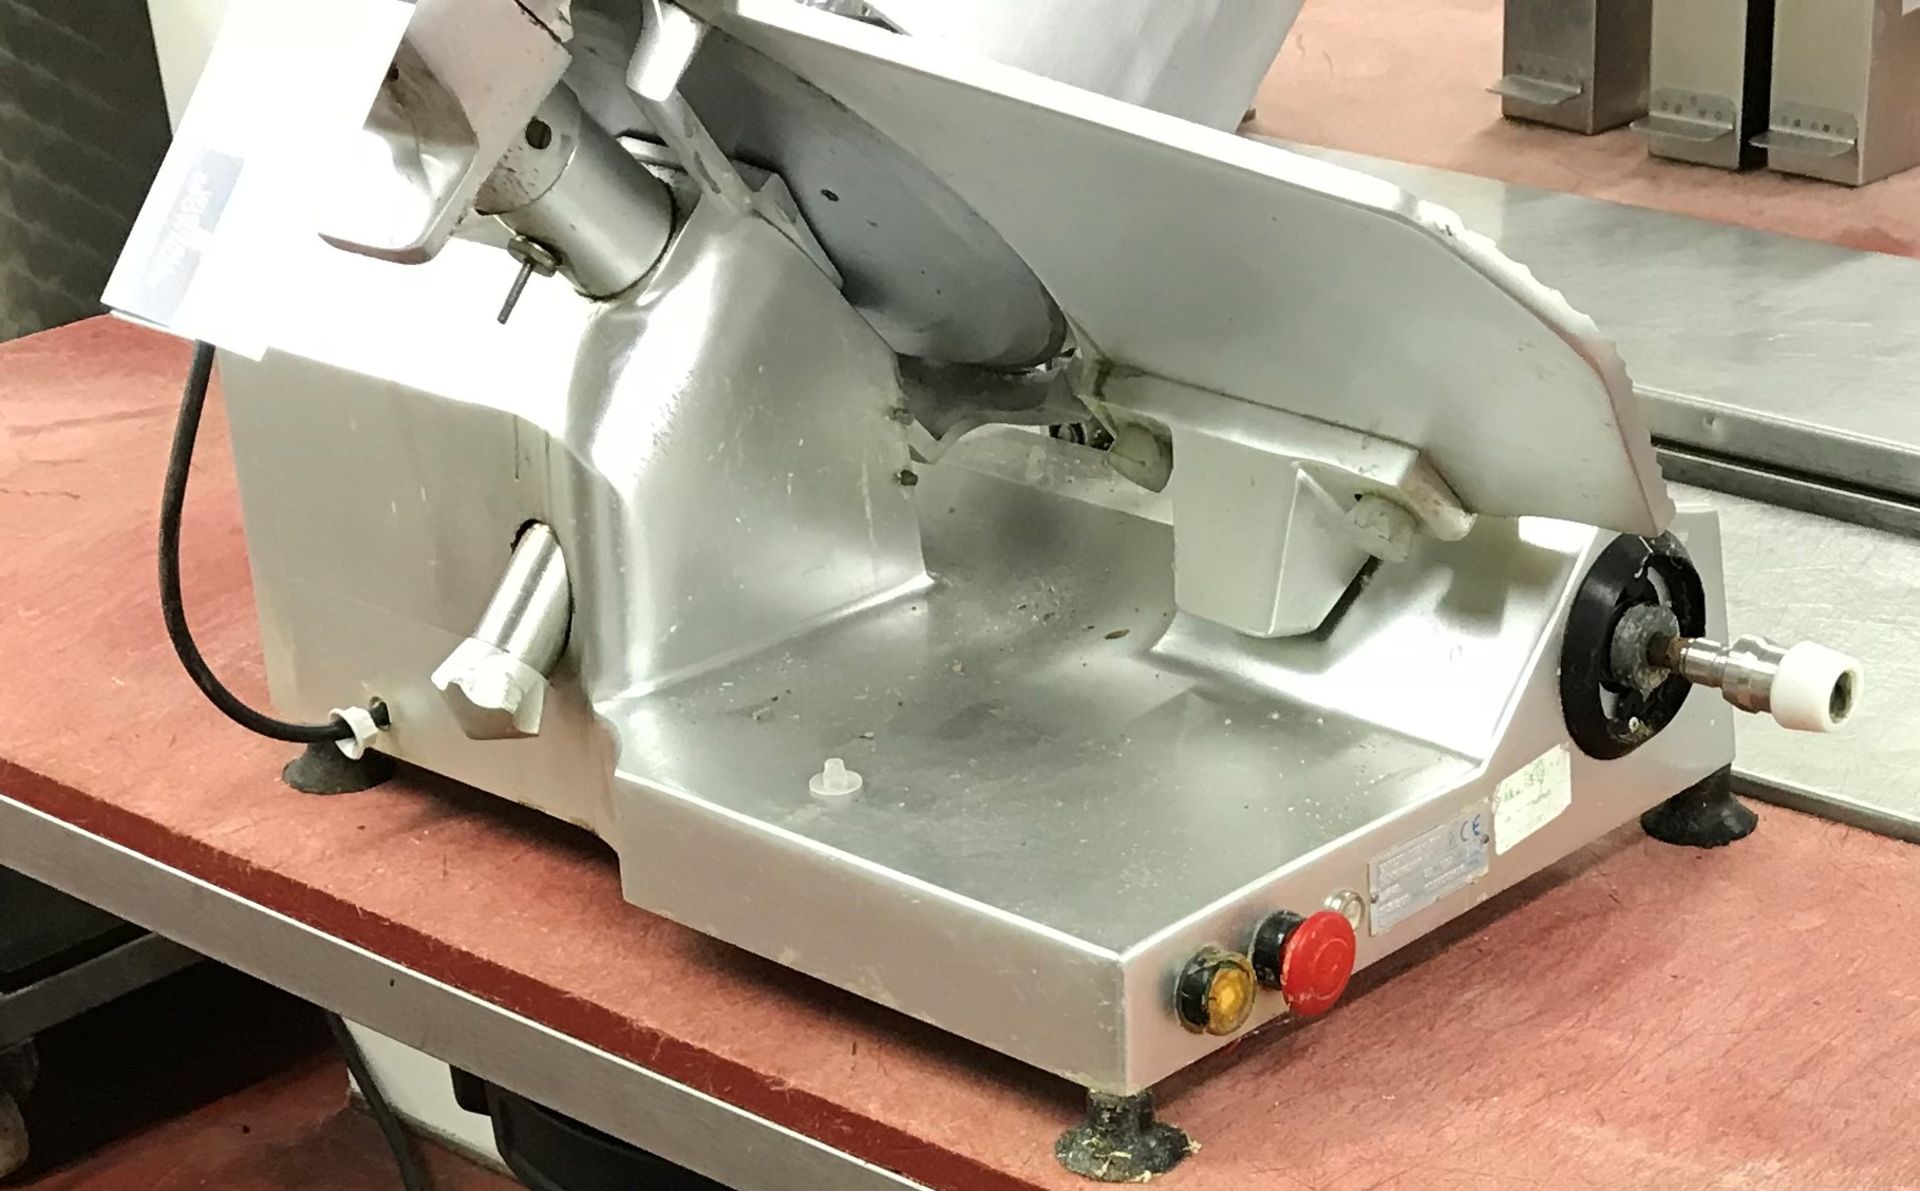 A Crypto Peerless MAX300 Gravity Feed Meat Slicer No.0000005476 (Fleetwood).